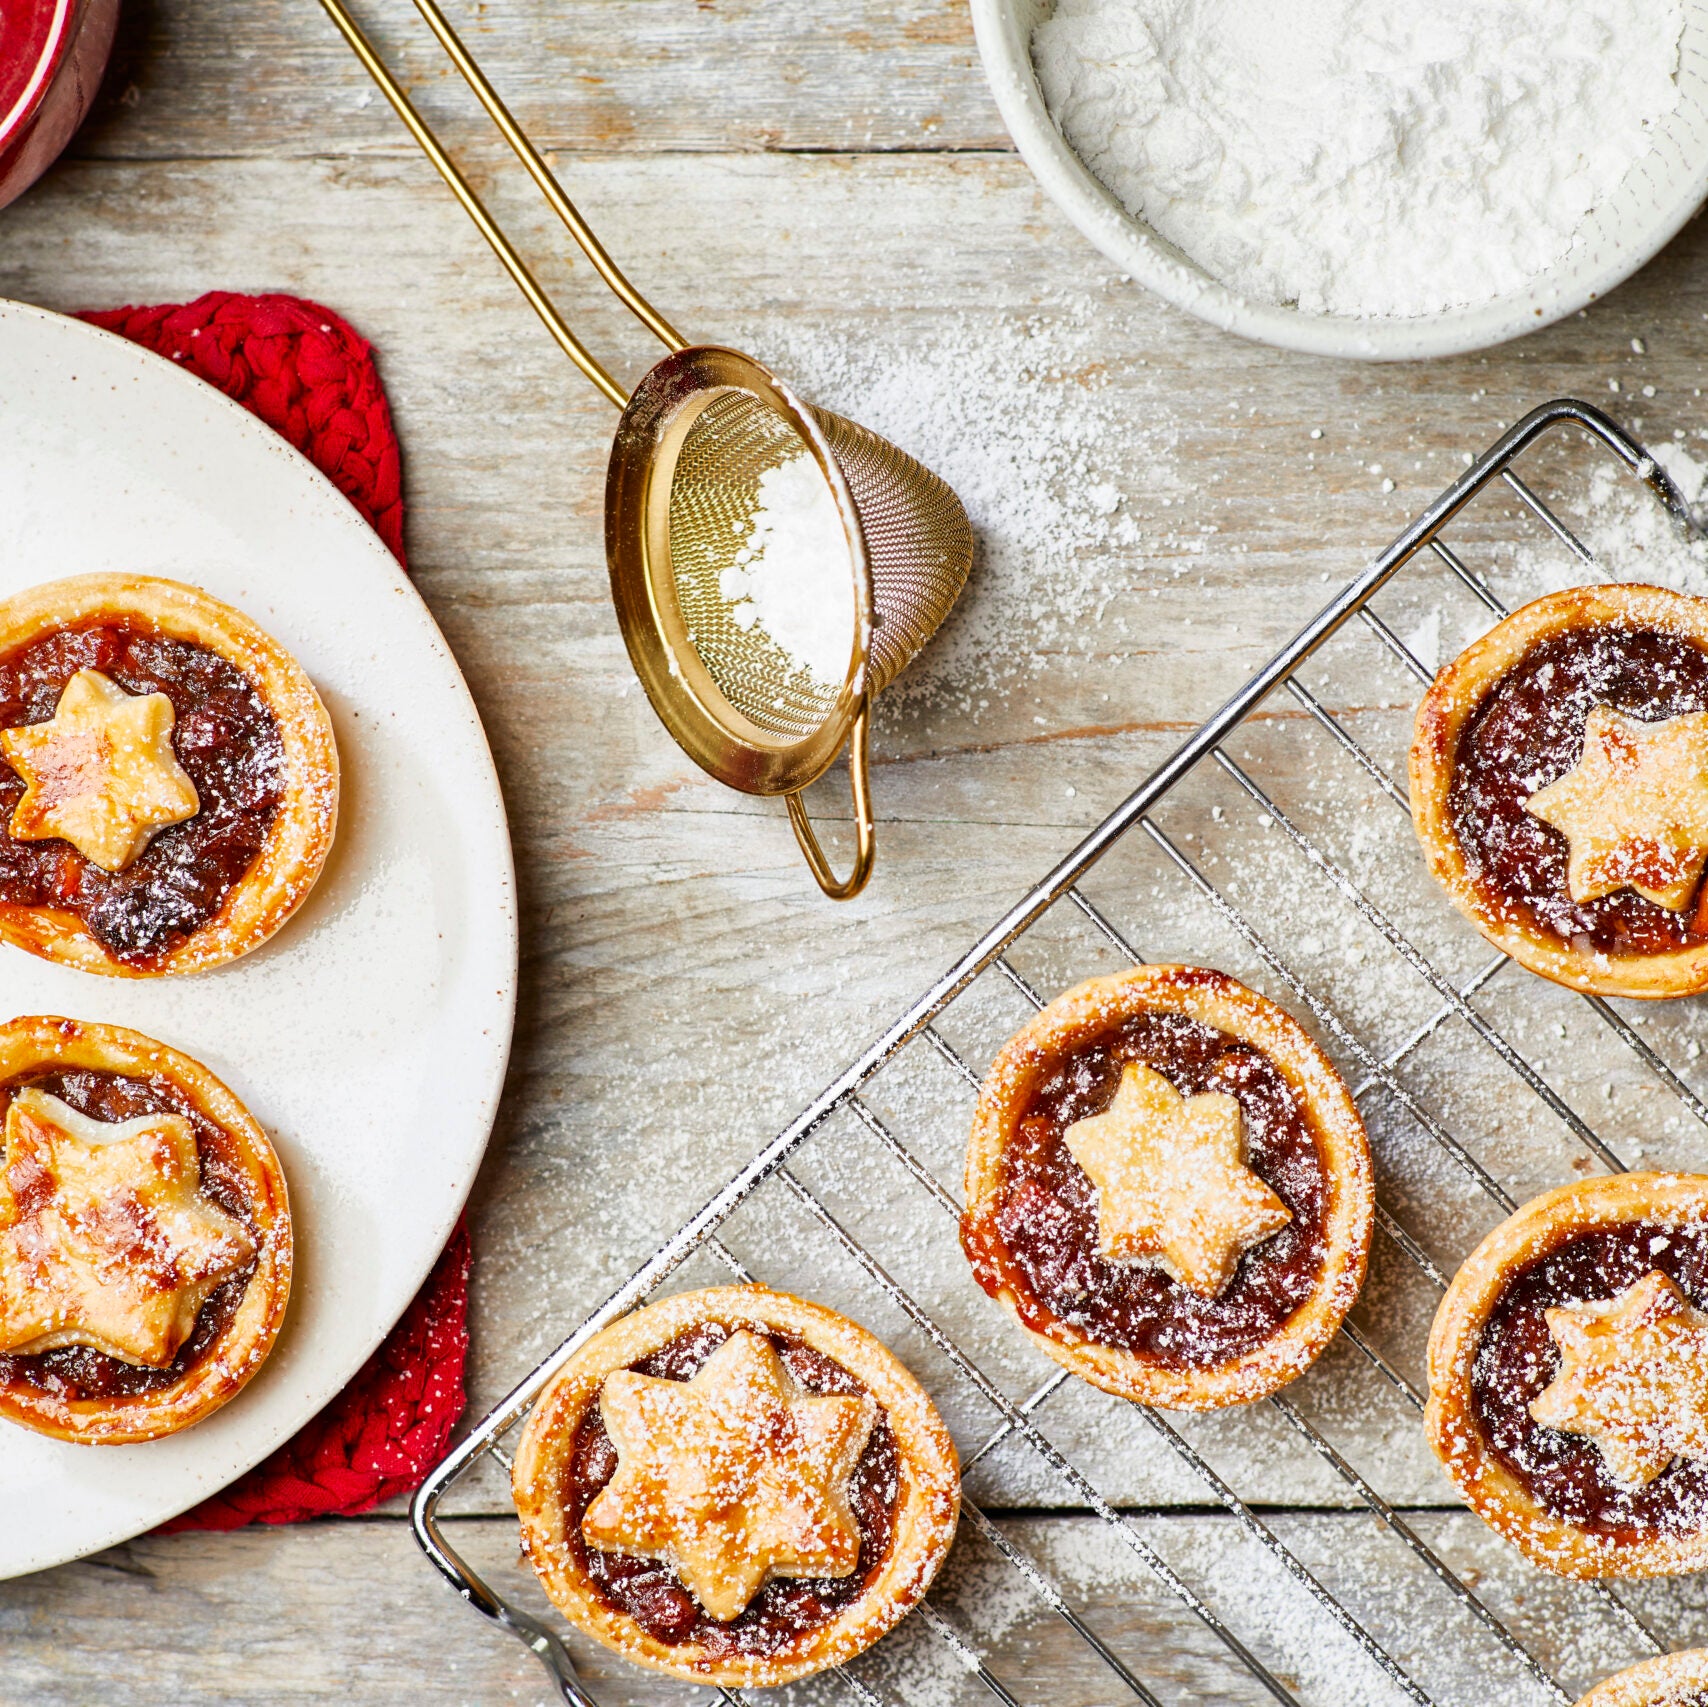 There’s no need to throw away that leftover pastry – just make more mince pies